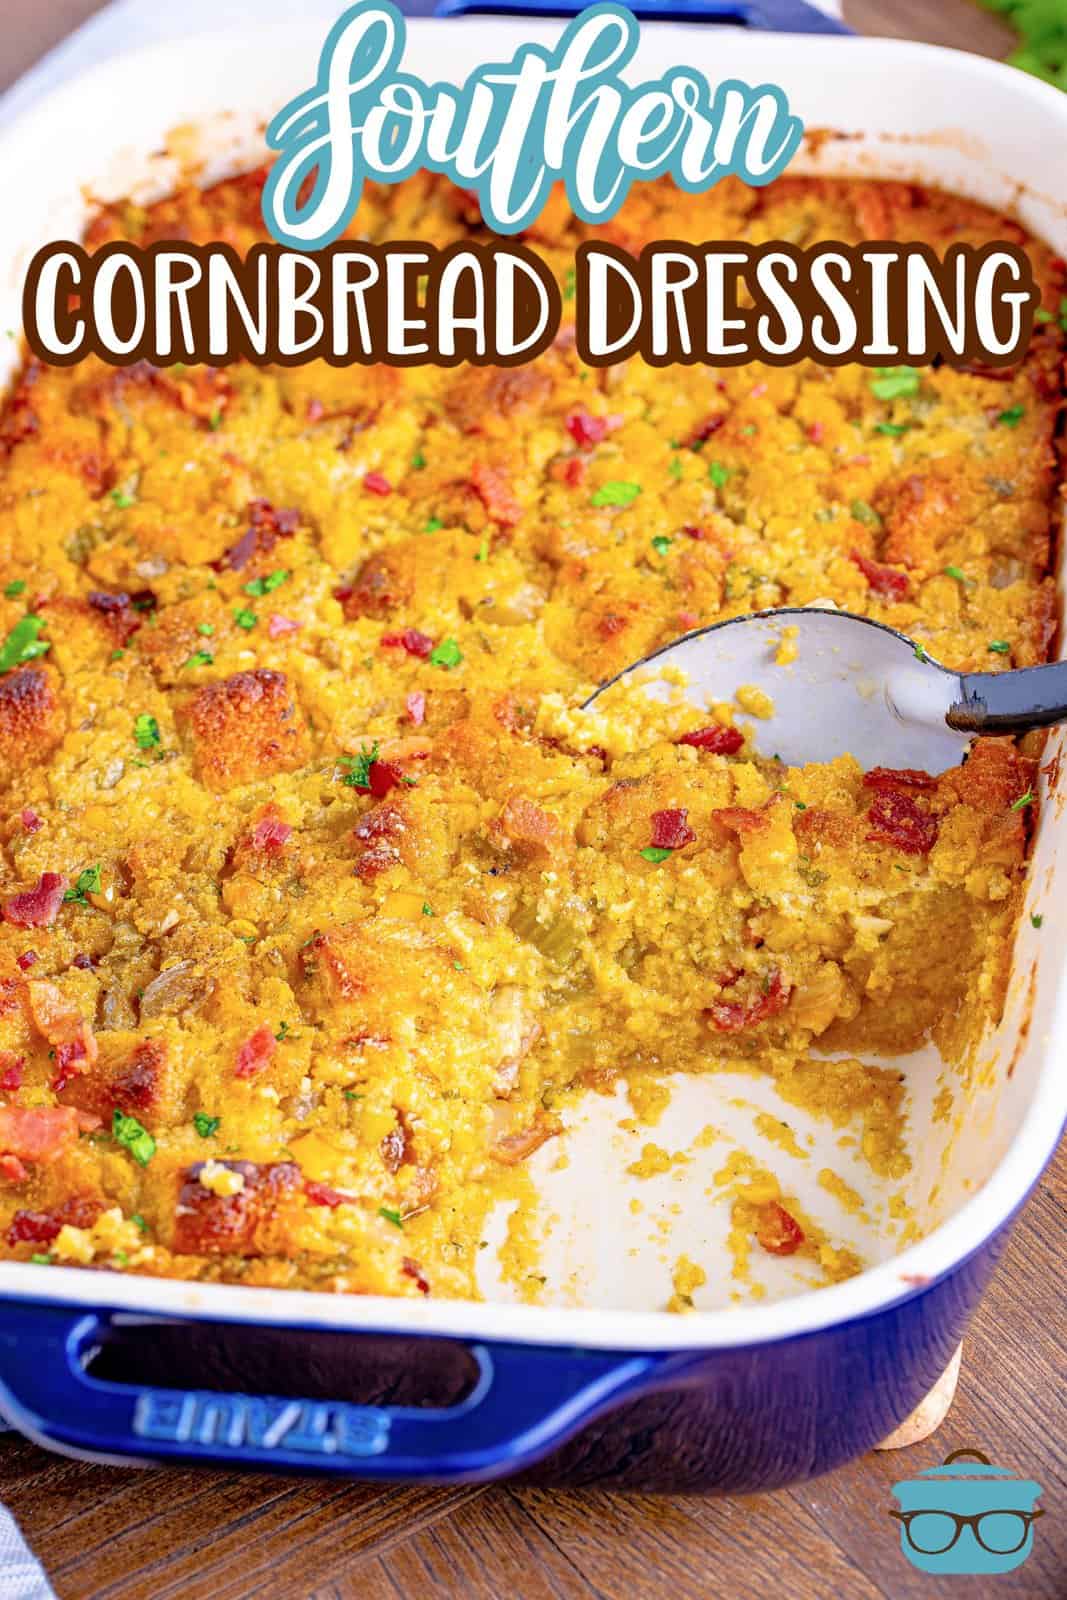 Pinterest image of Southern Cornbread Dressing with a scoop taken out with spoon in baking dish.